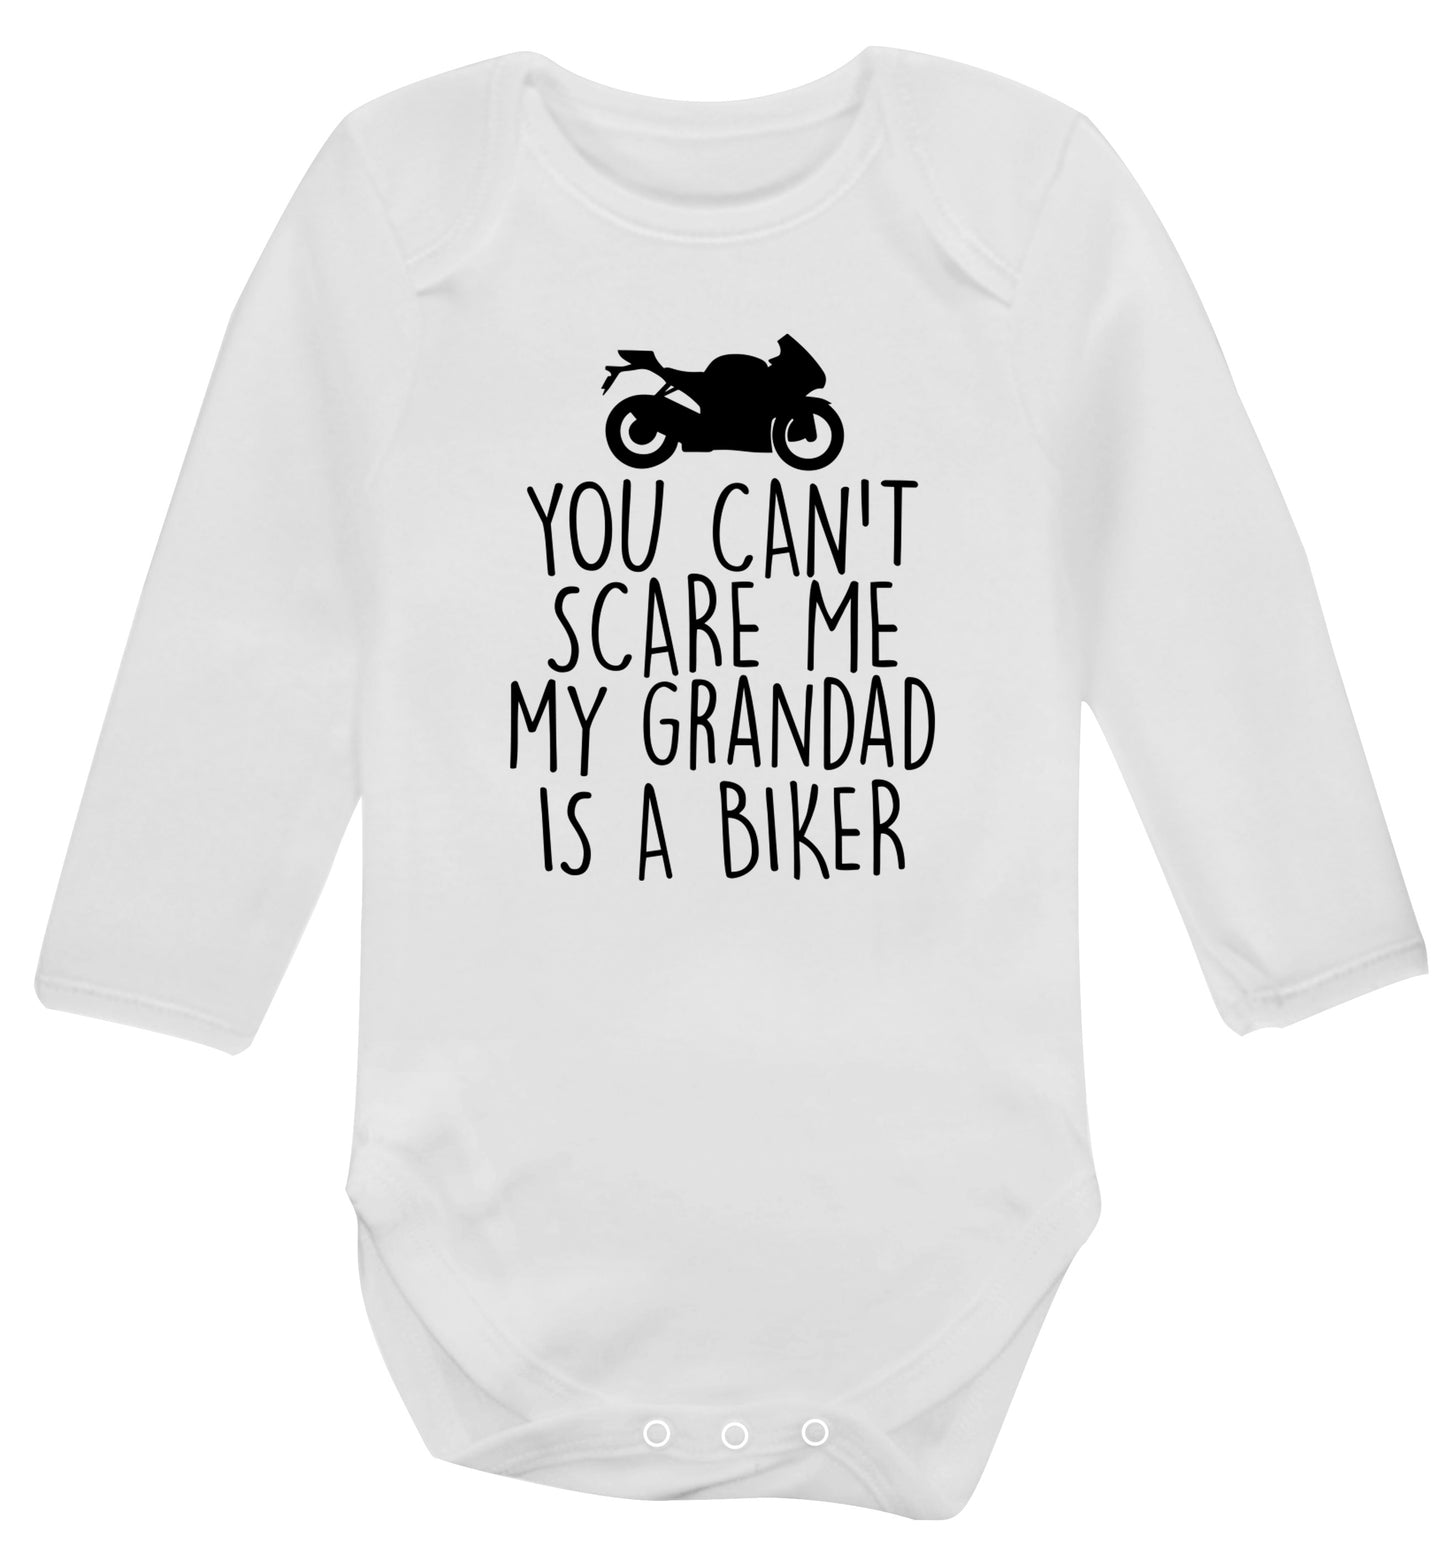 You can't scare me my grandad is a biker Baby Vest long sleeved white 6-12 months